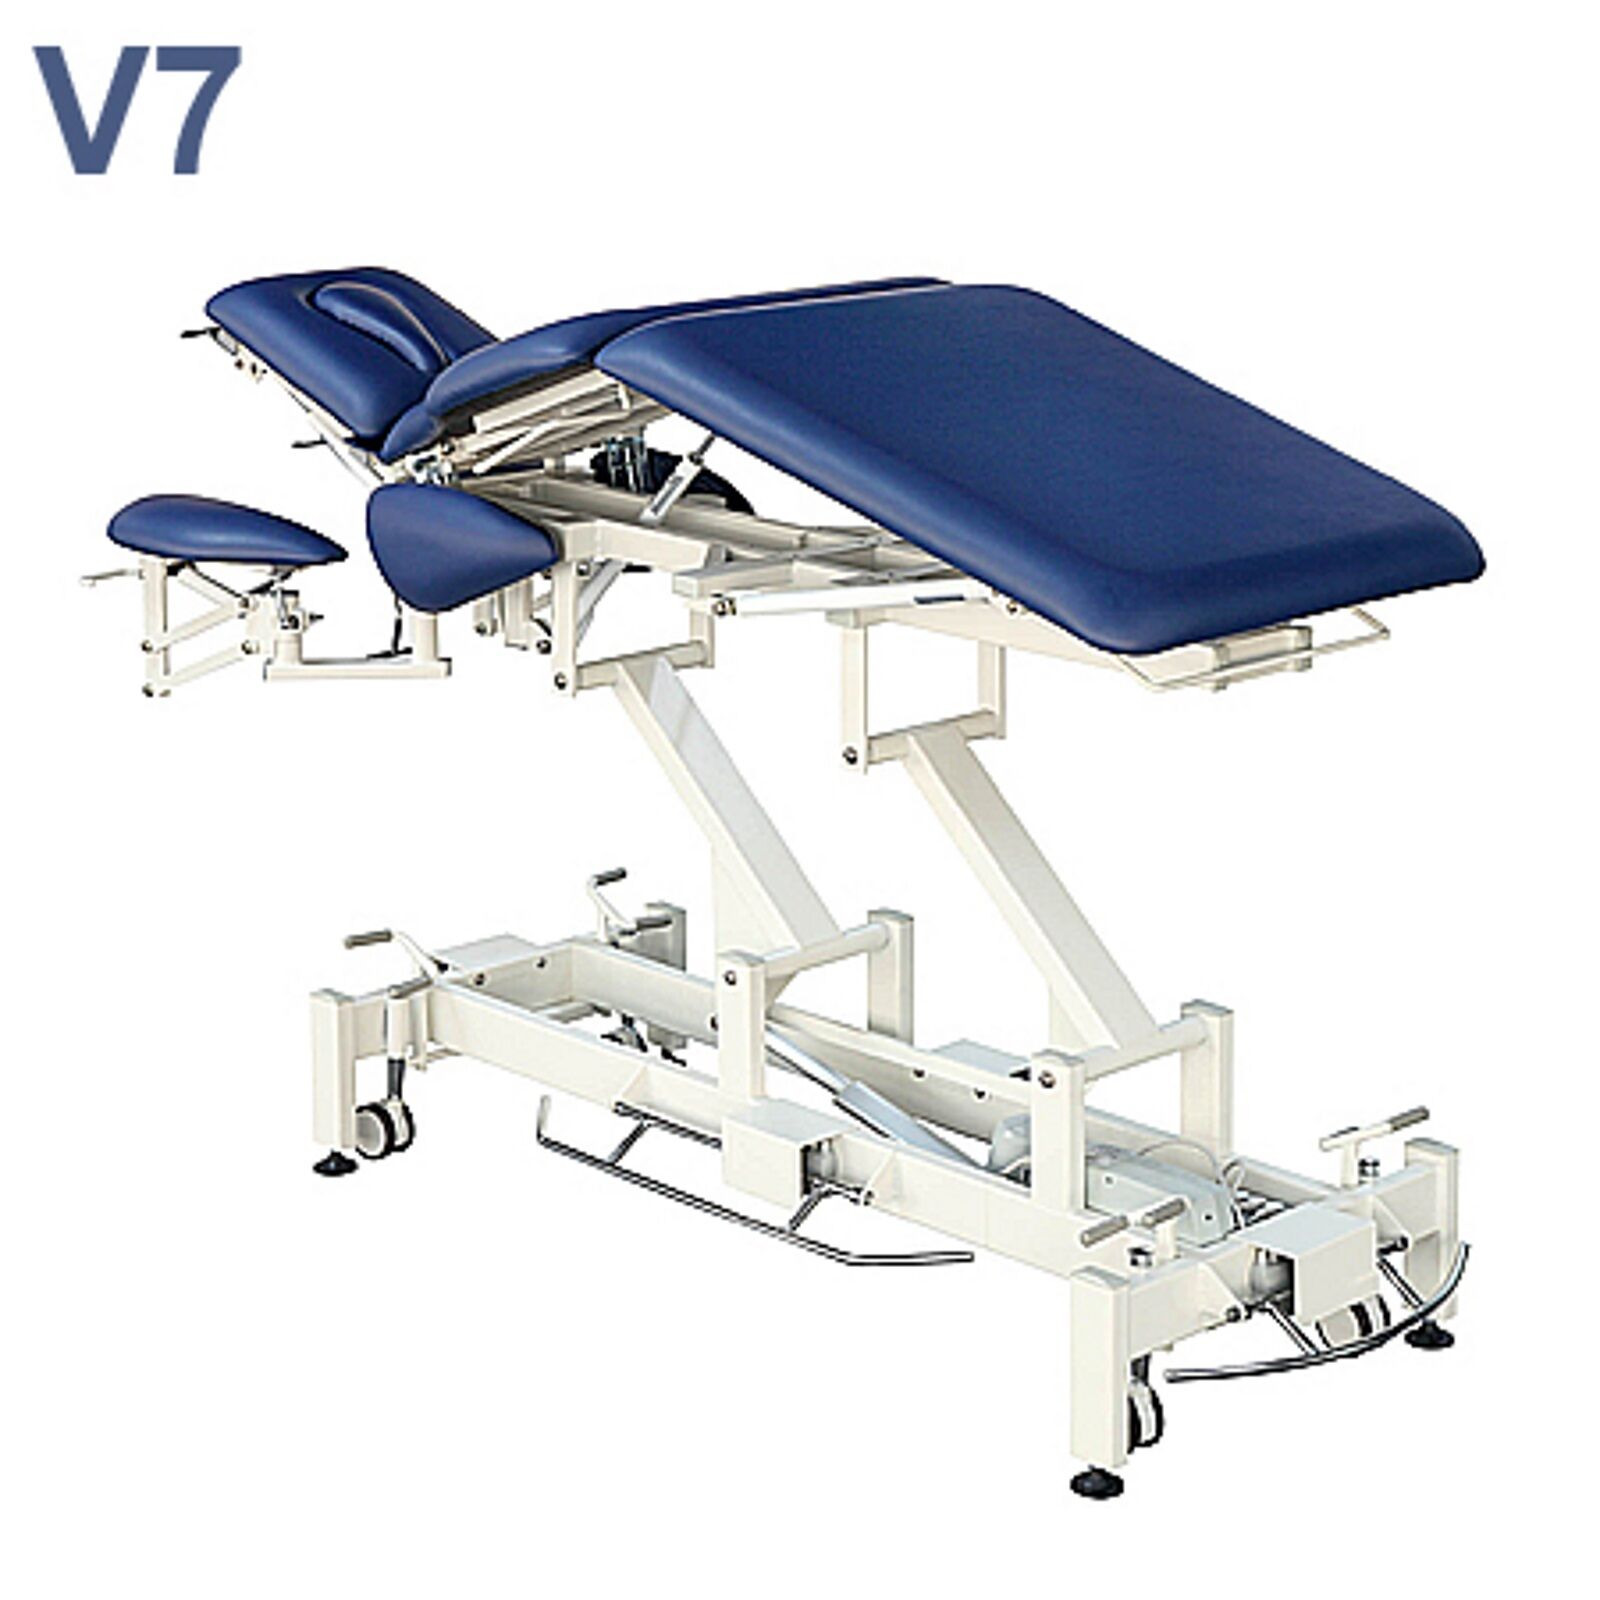 Everyway4all CA100 Blue 7 Section Chiropractic physical therapy treatment Table